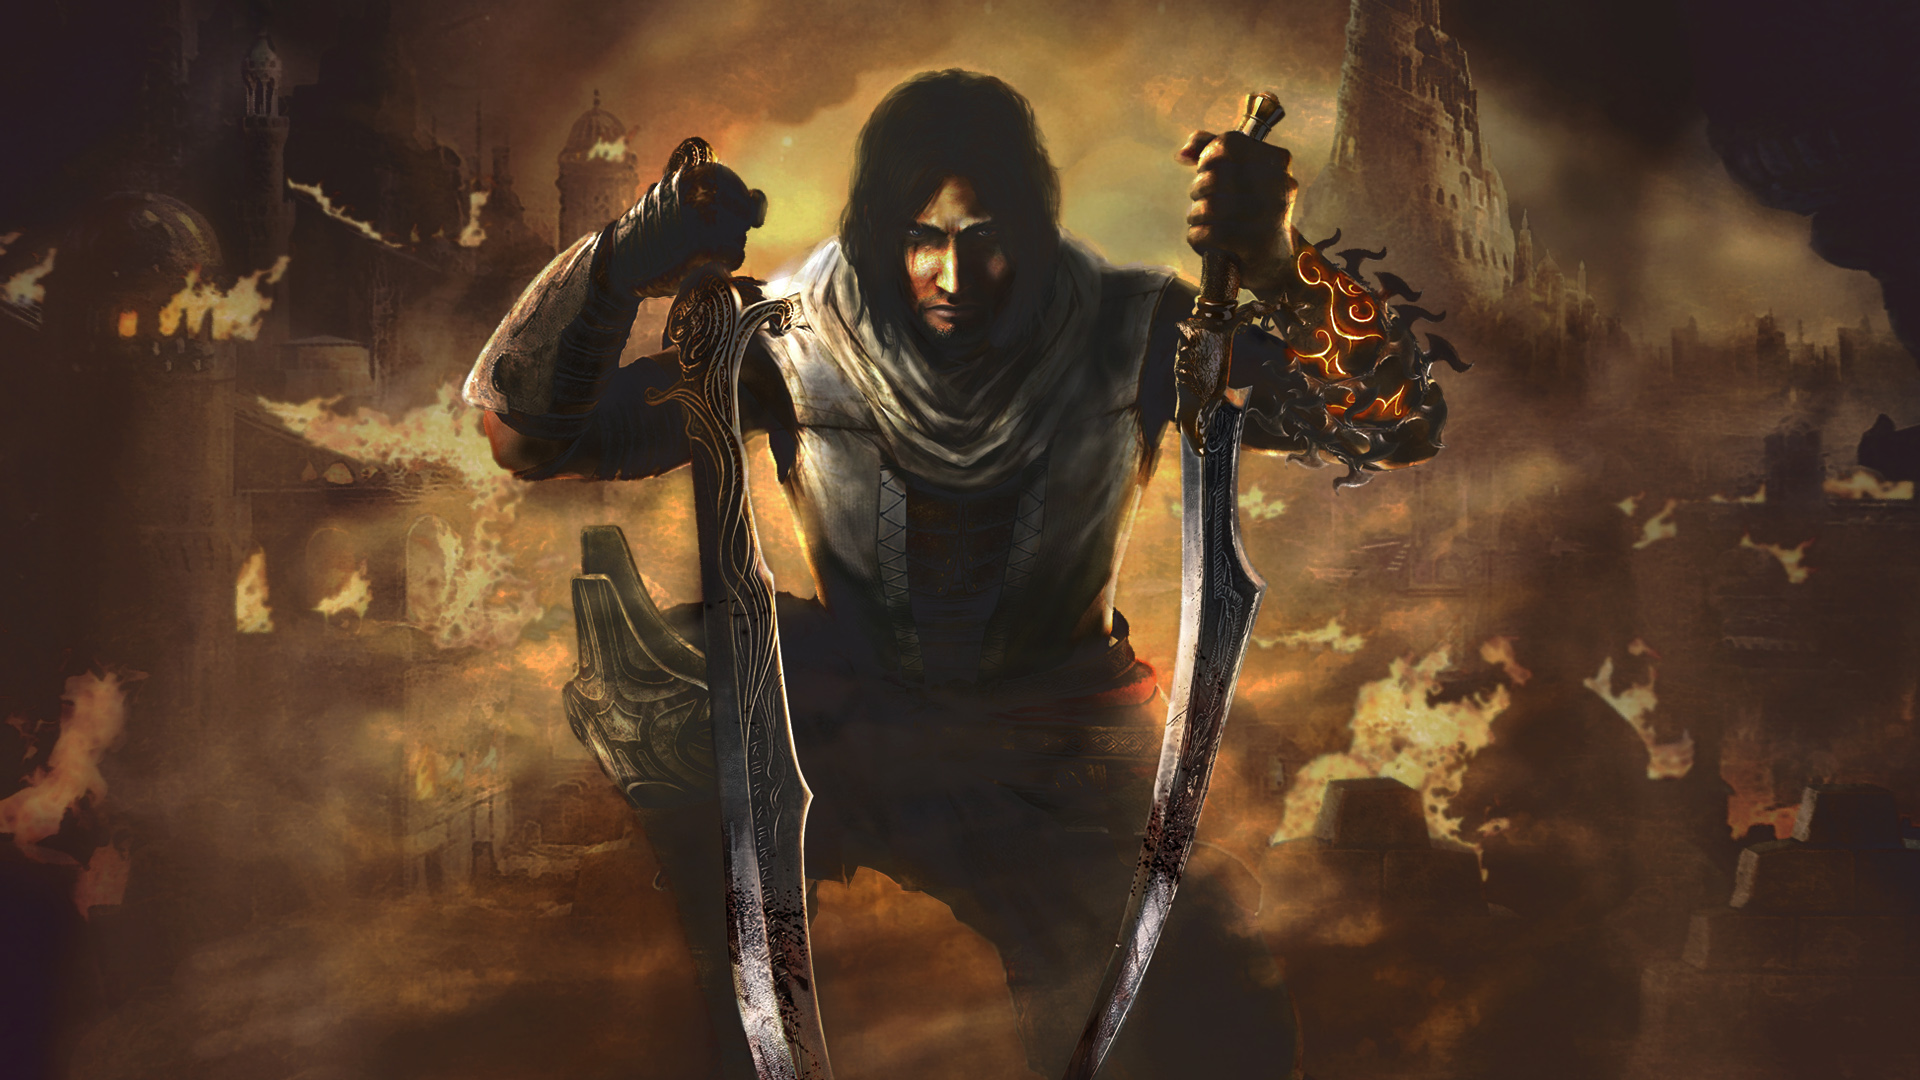 39 Prince Of Persia HD Wallpapers Backgrounds - Wallpaper Abyss